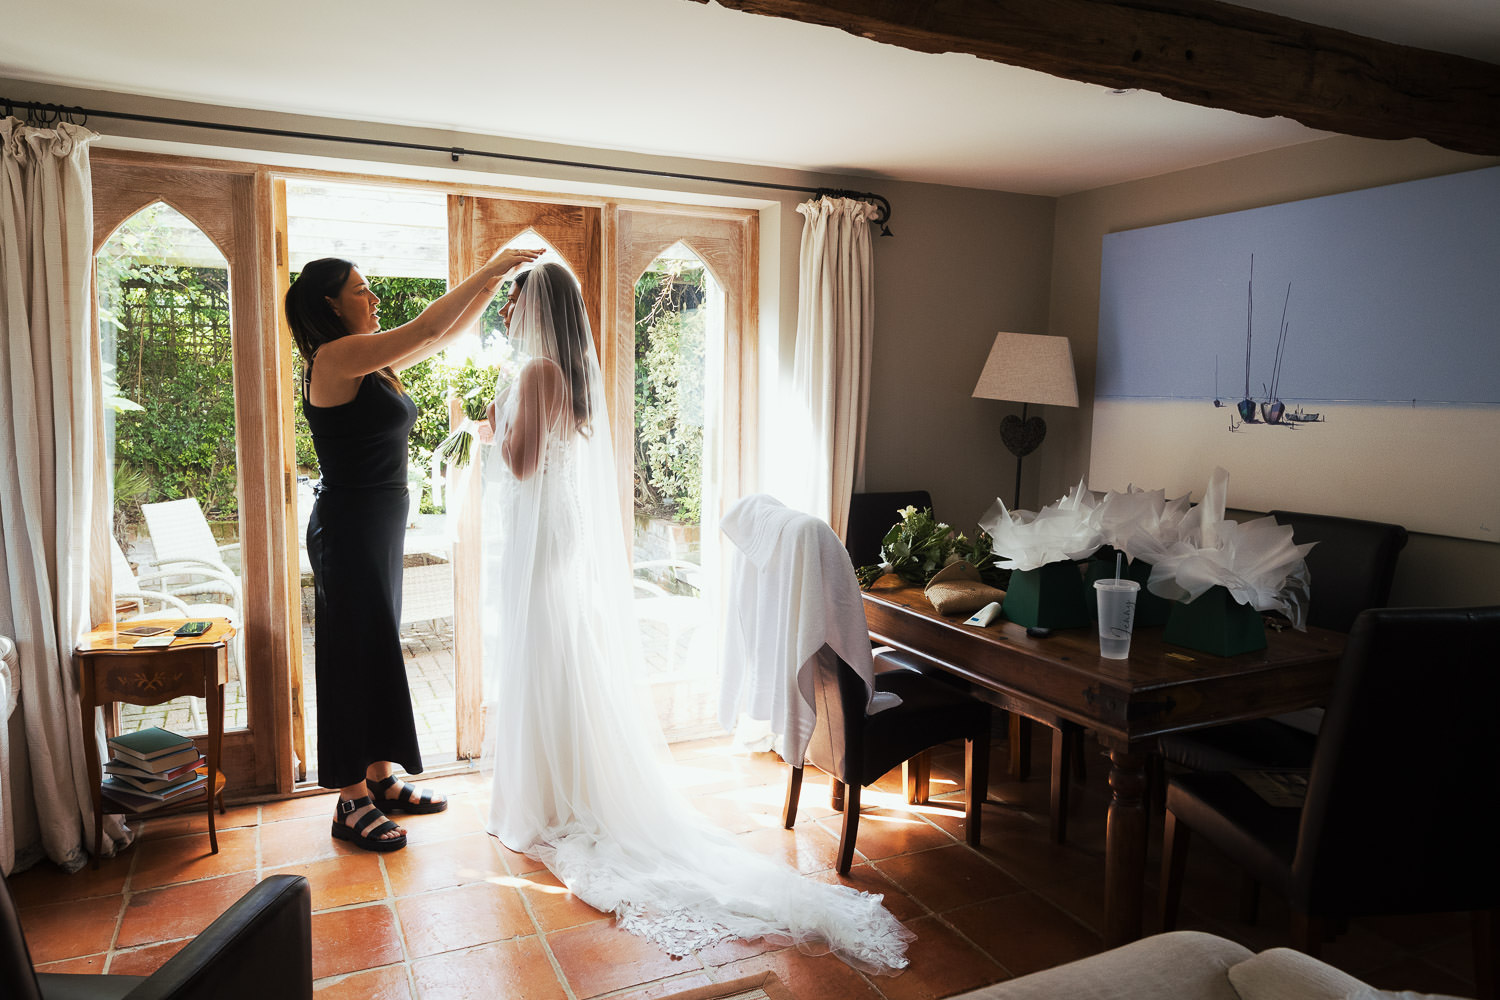 Hollie of Glow Occasion Hair, the finishing touches to the bride's hair and veil. Standing in the light of the French doors in the lounge of The Priory Dairy in Lavenham.